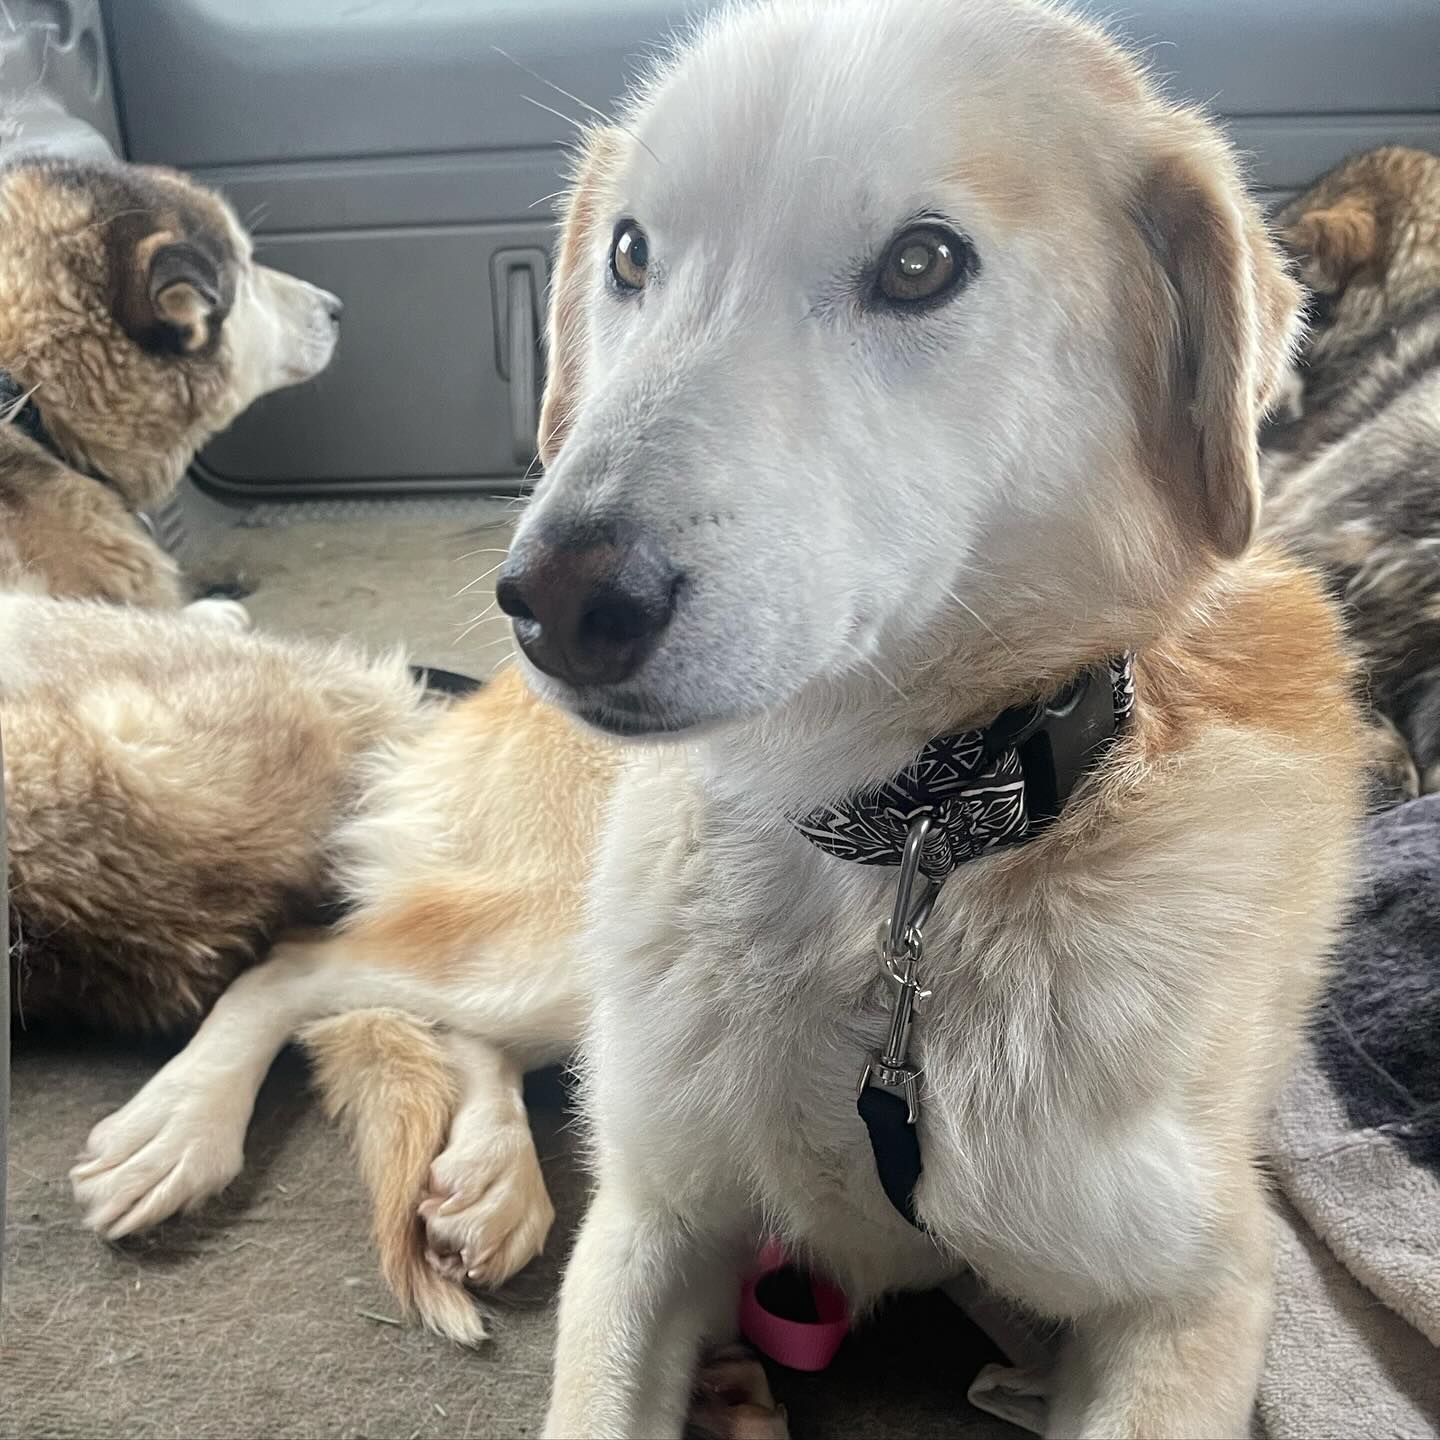 5 sleddies rescued and on their way to fosters 💜

I love what I do! 🥰 thank you to the amazing mushers who surrendered them to us, you know who you are 🙏💕 I